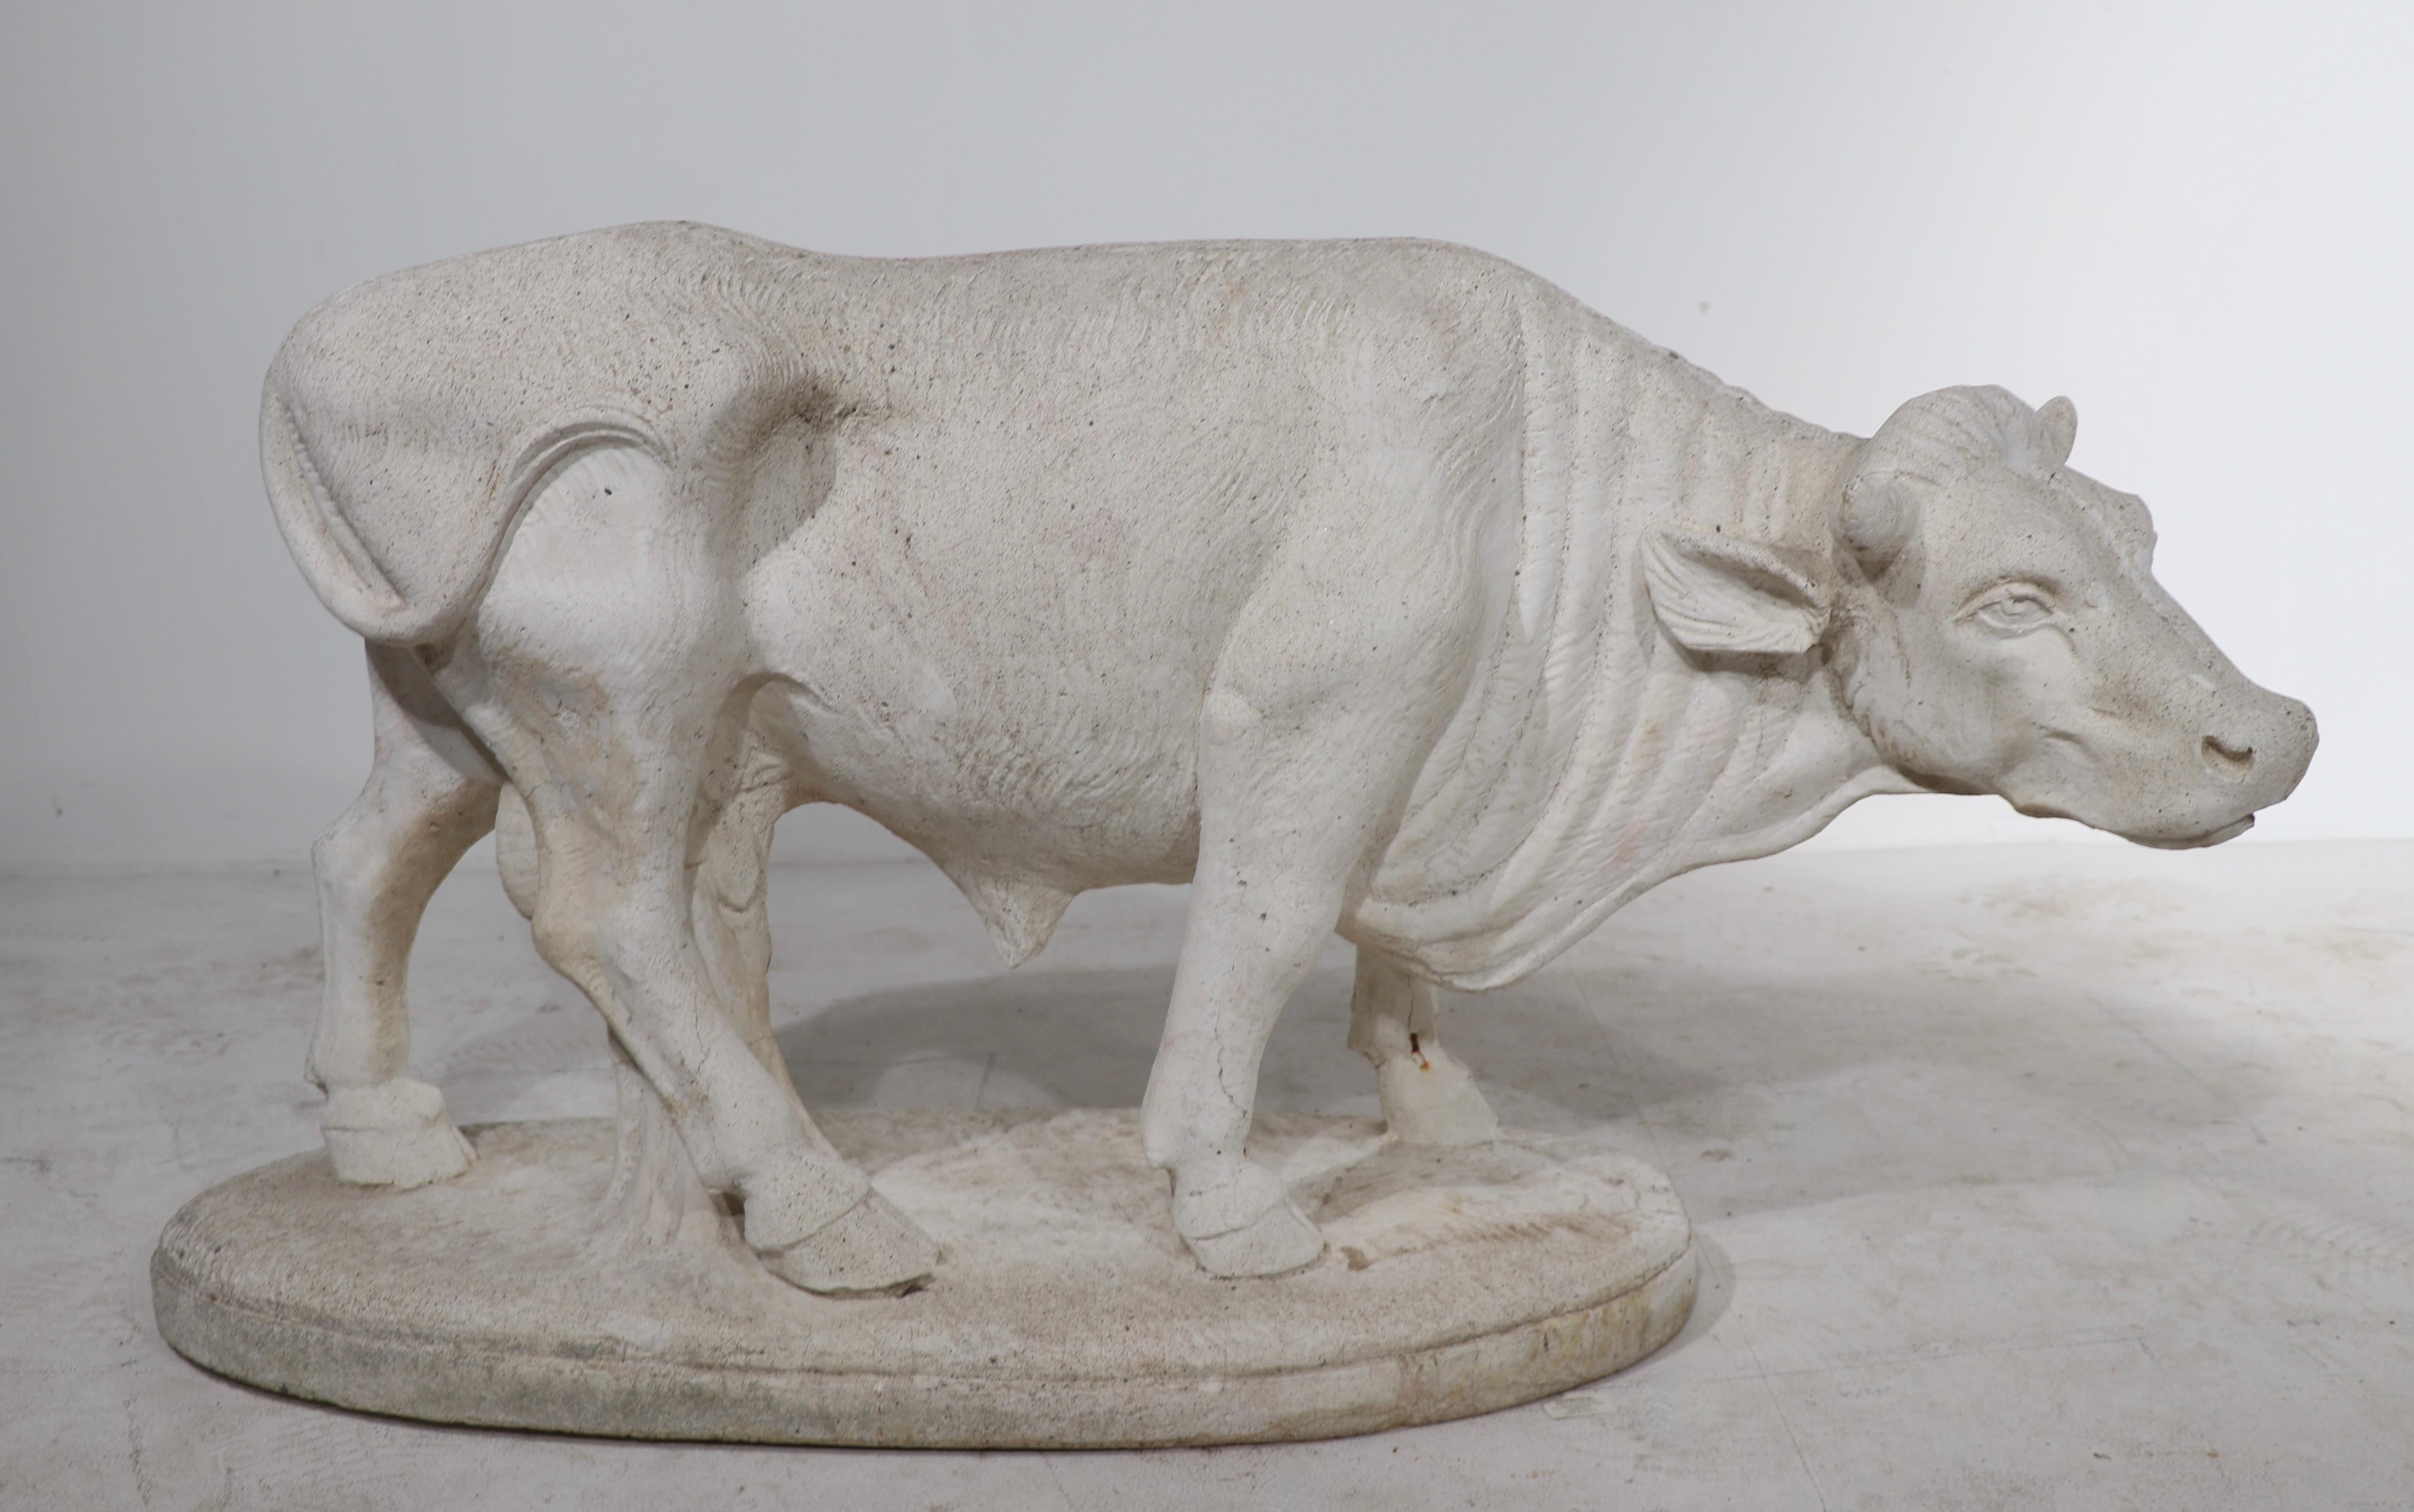 Well detailed poured stone bull statue. We believe this item was originally placed in a shop in France, perhaps a butcher shop, as display. It appears as though the piece was never placed outdoors, hence the interesting white color. Great object